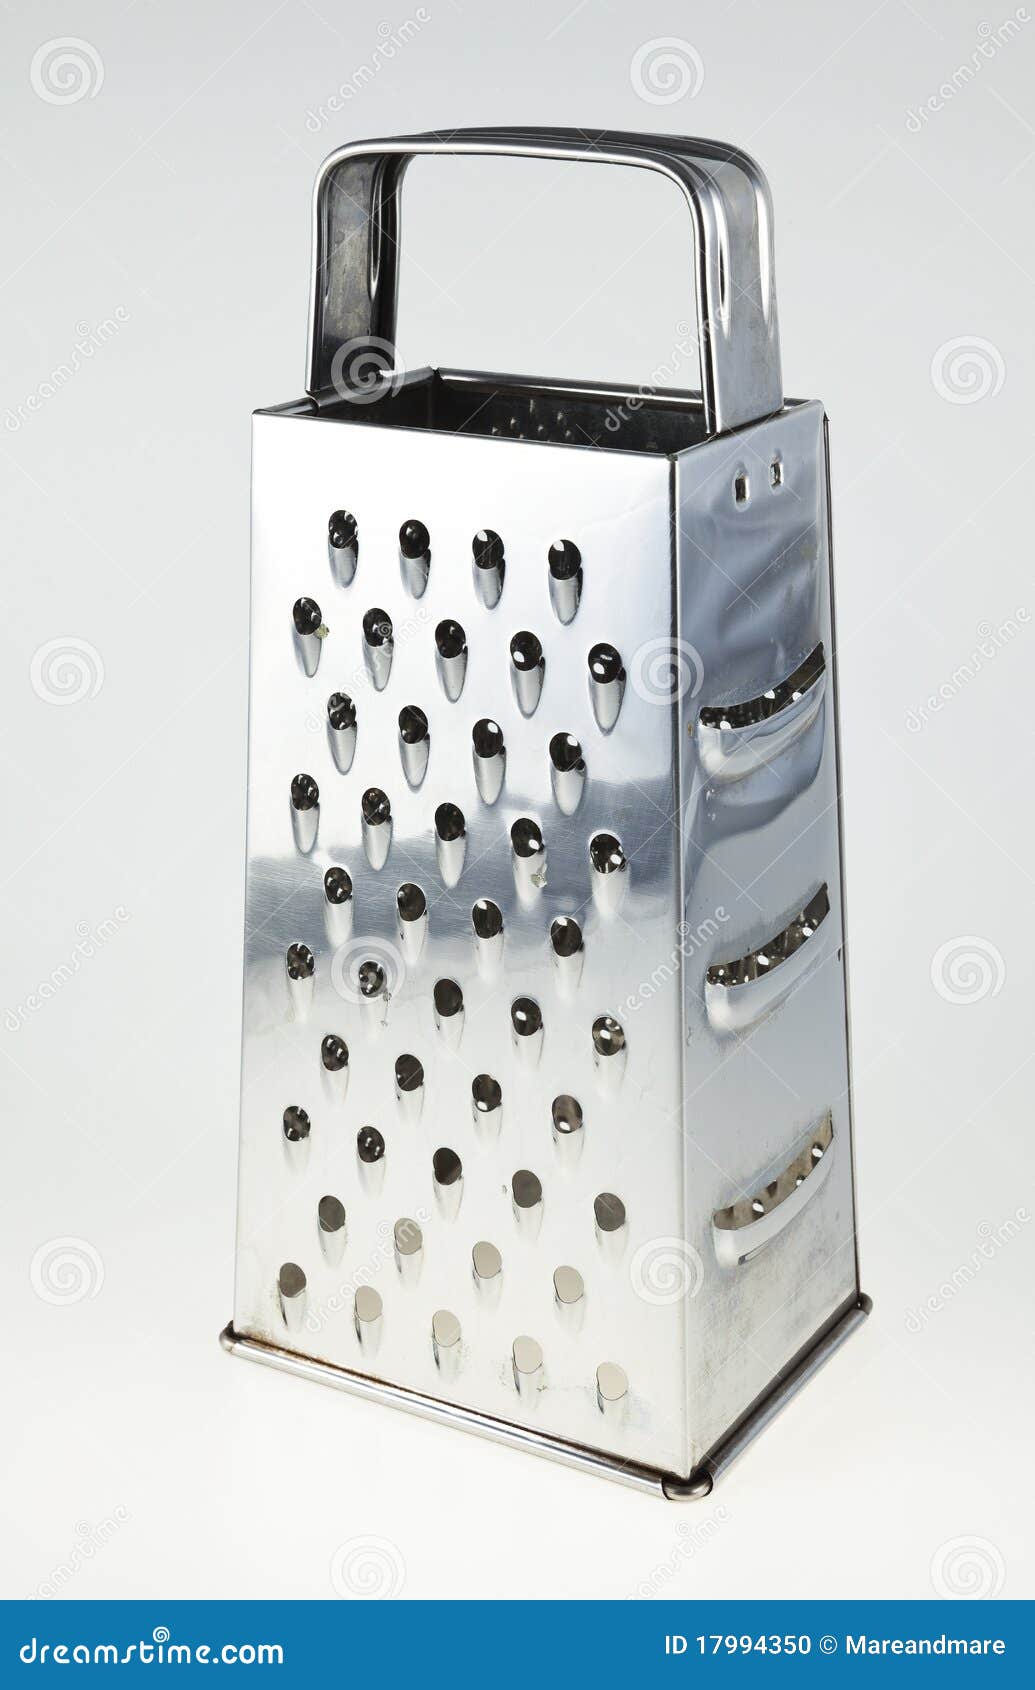 Premium Photo  Metal grater and apple on white background